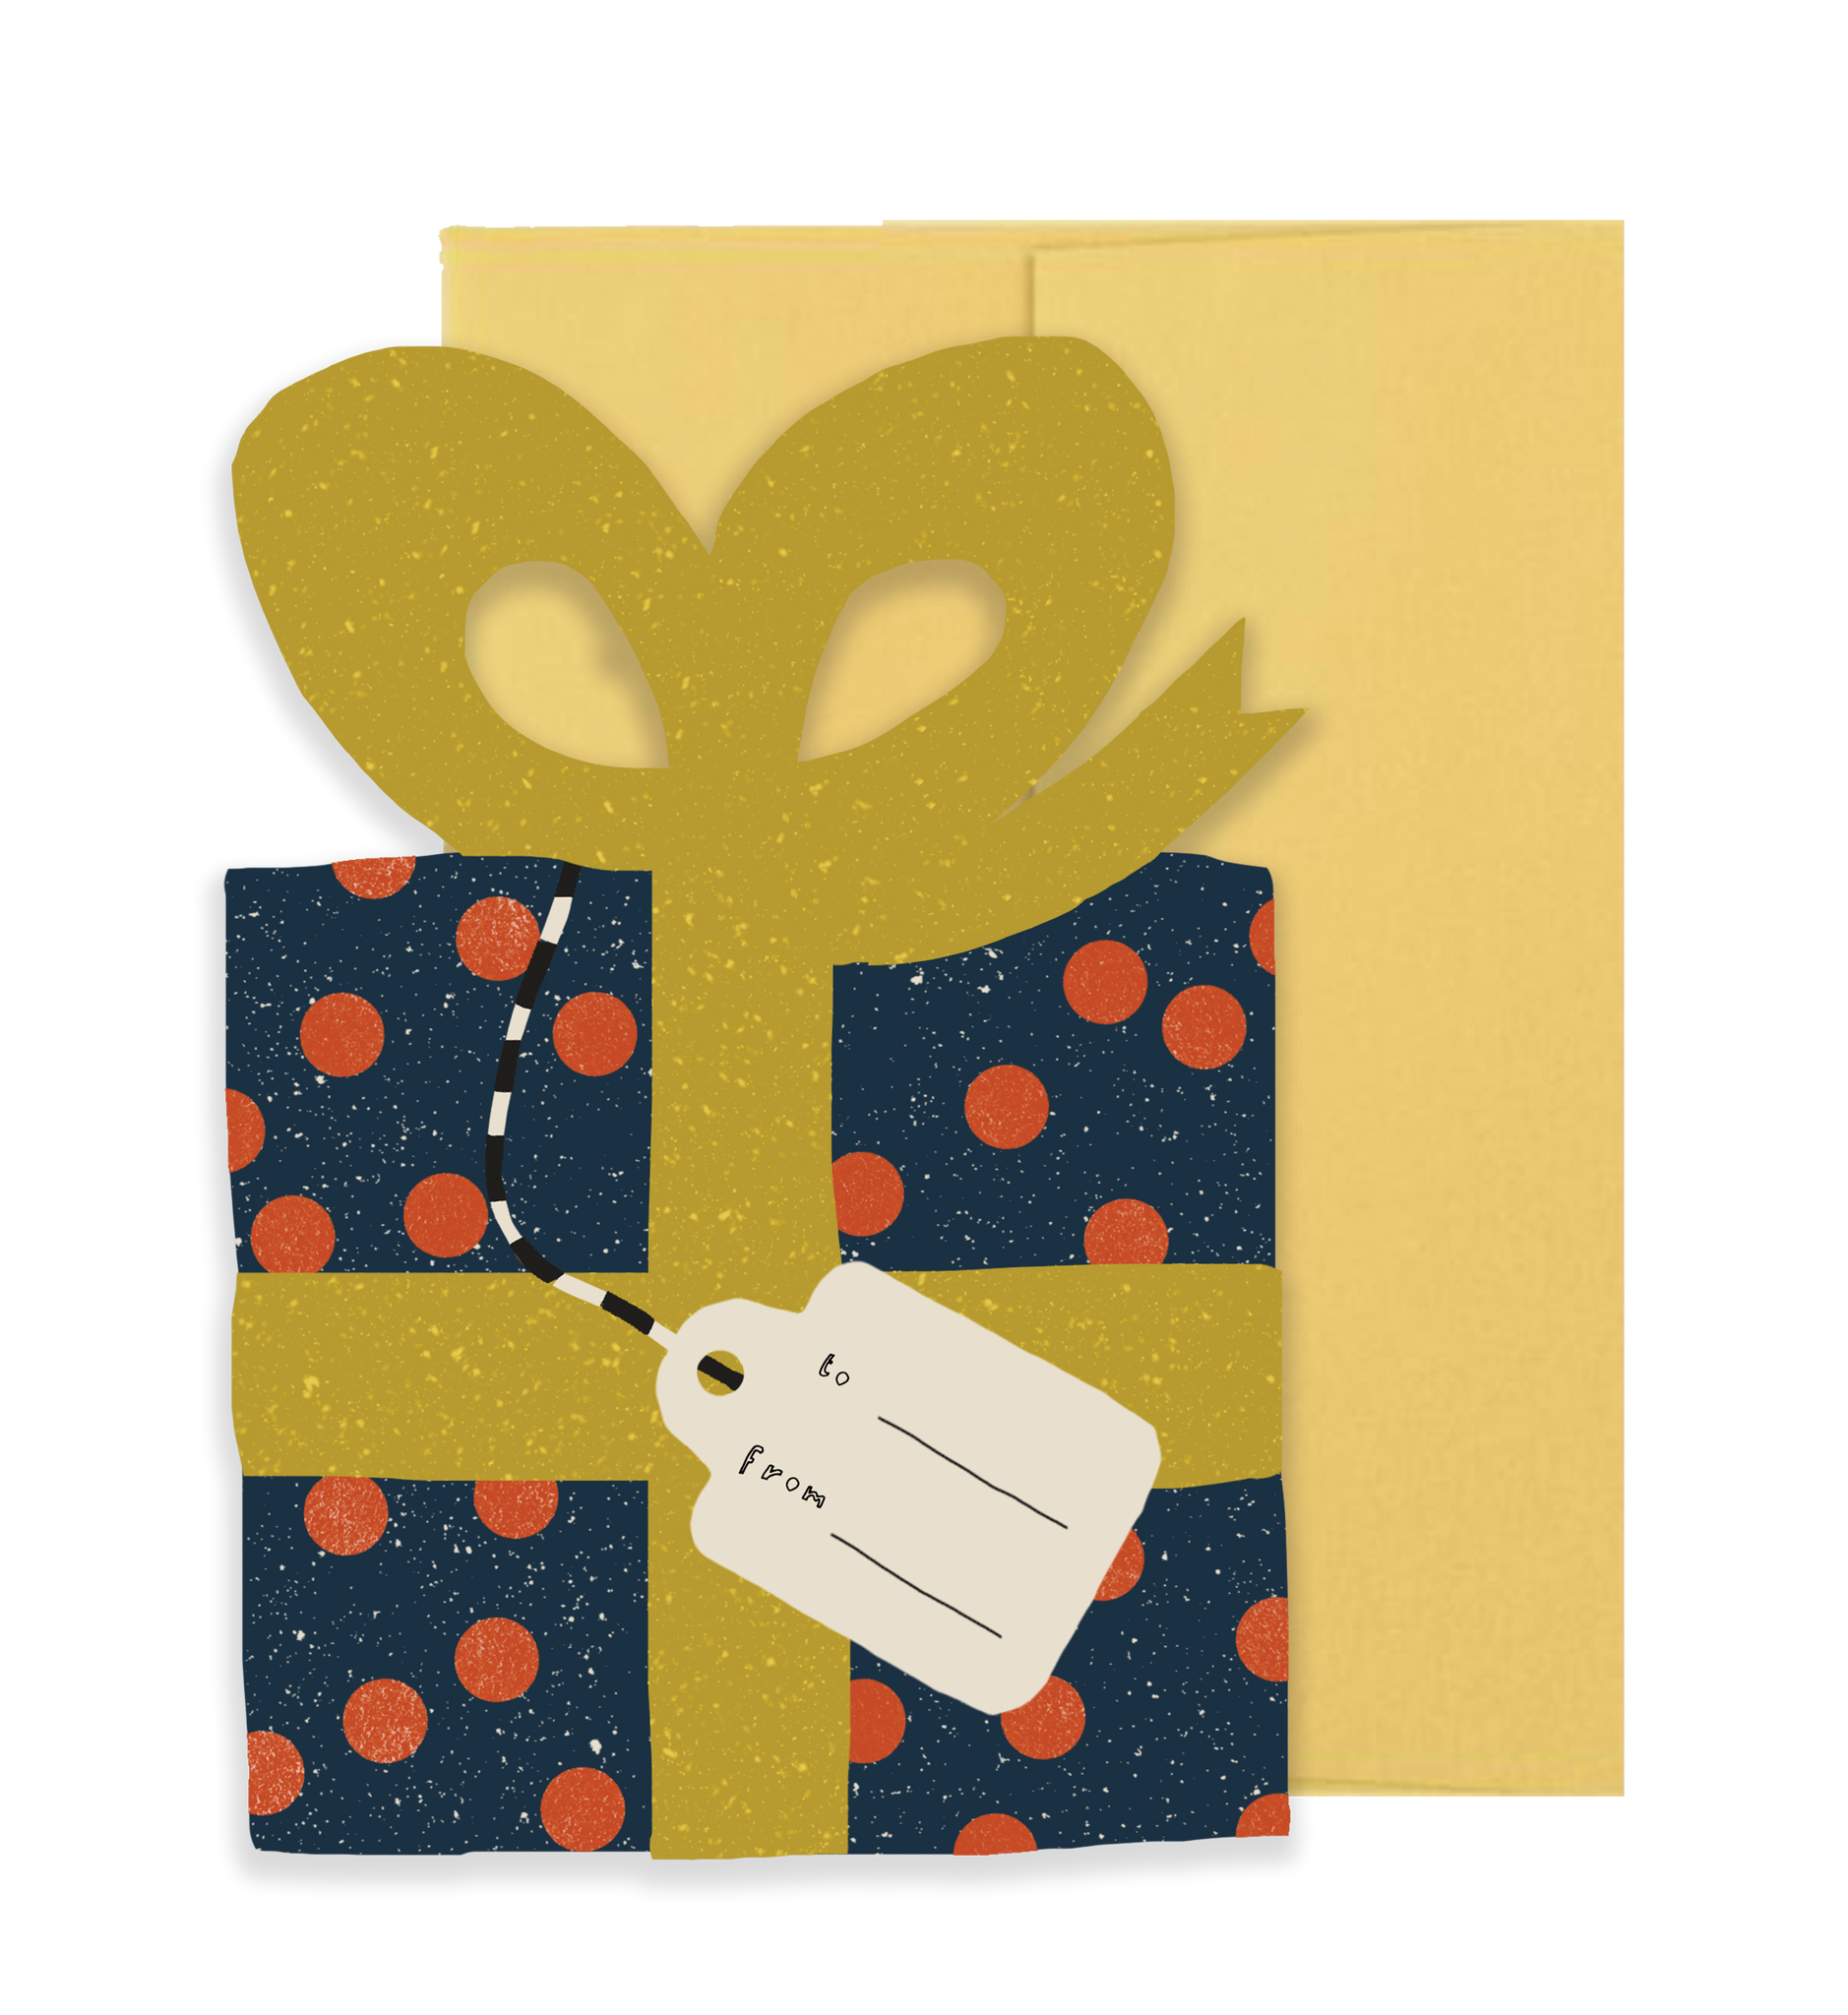 GIFT HOLIDAY - Die Cut Card